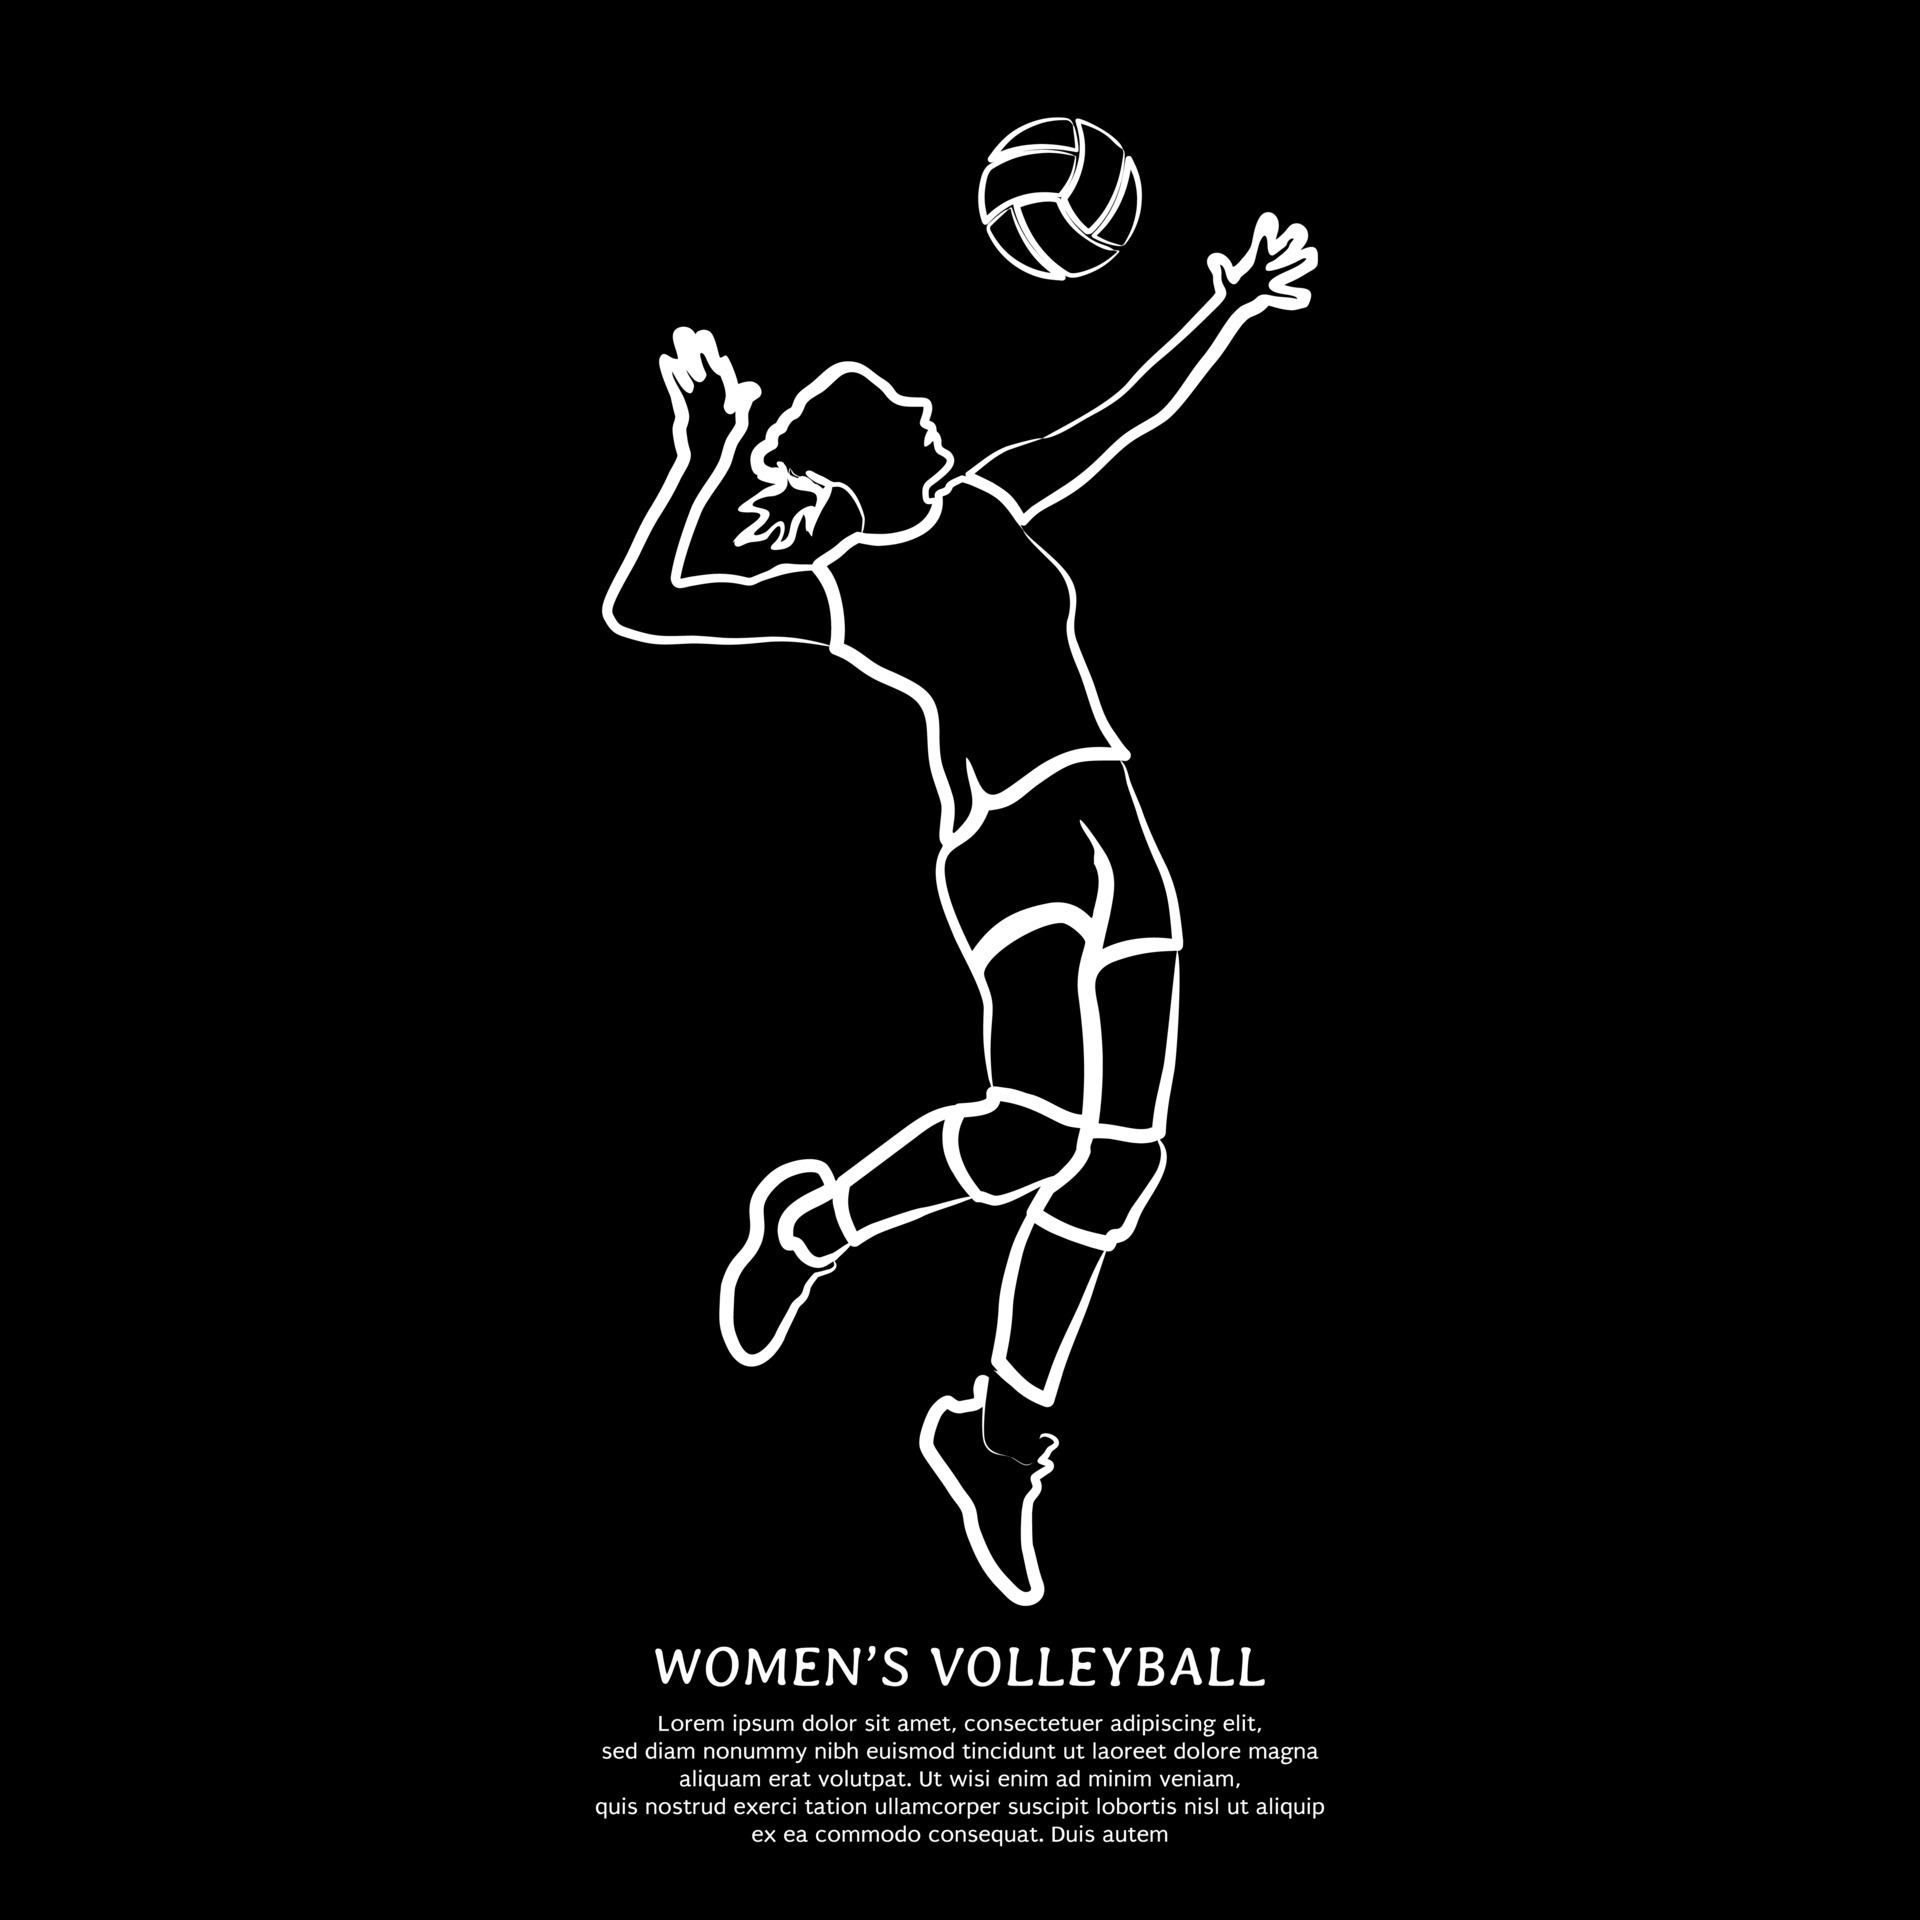 Volleyball background black Images and videos for your design projects